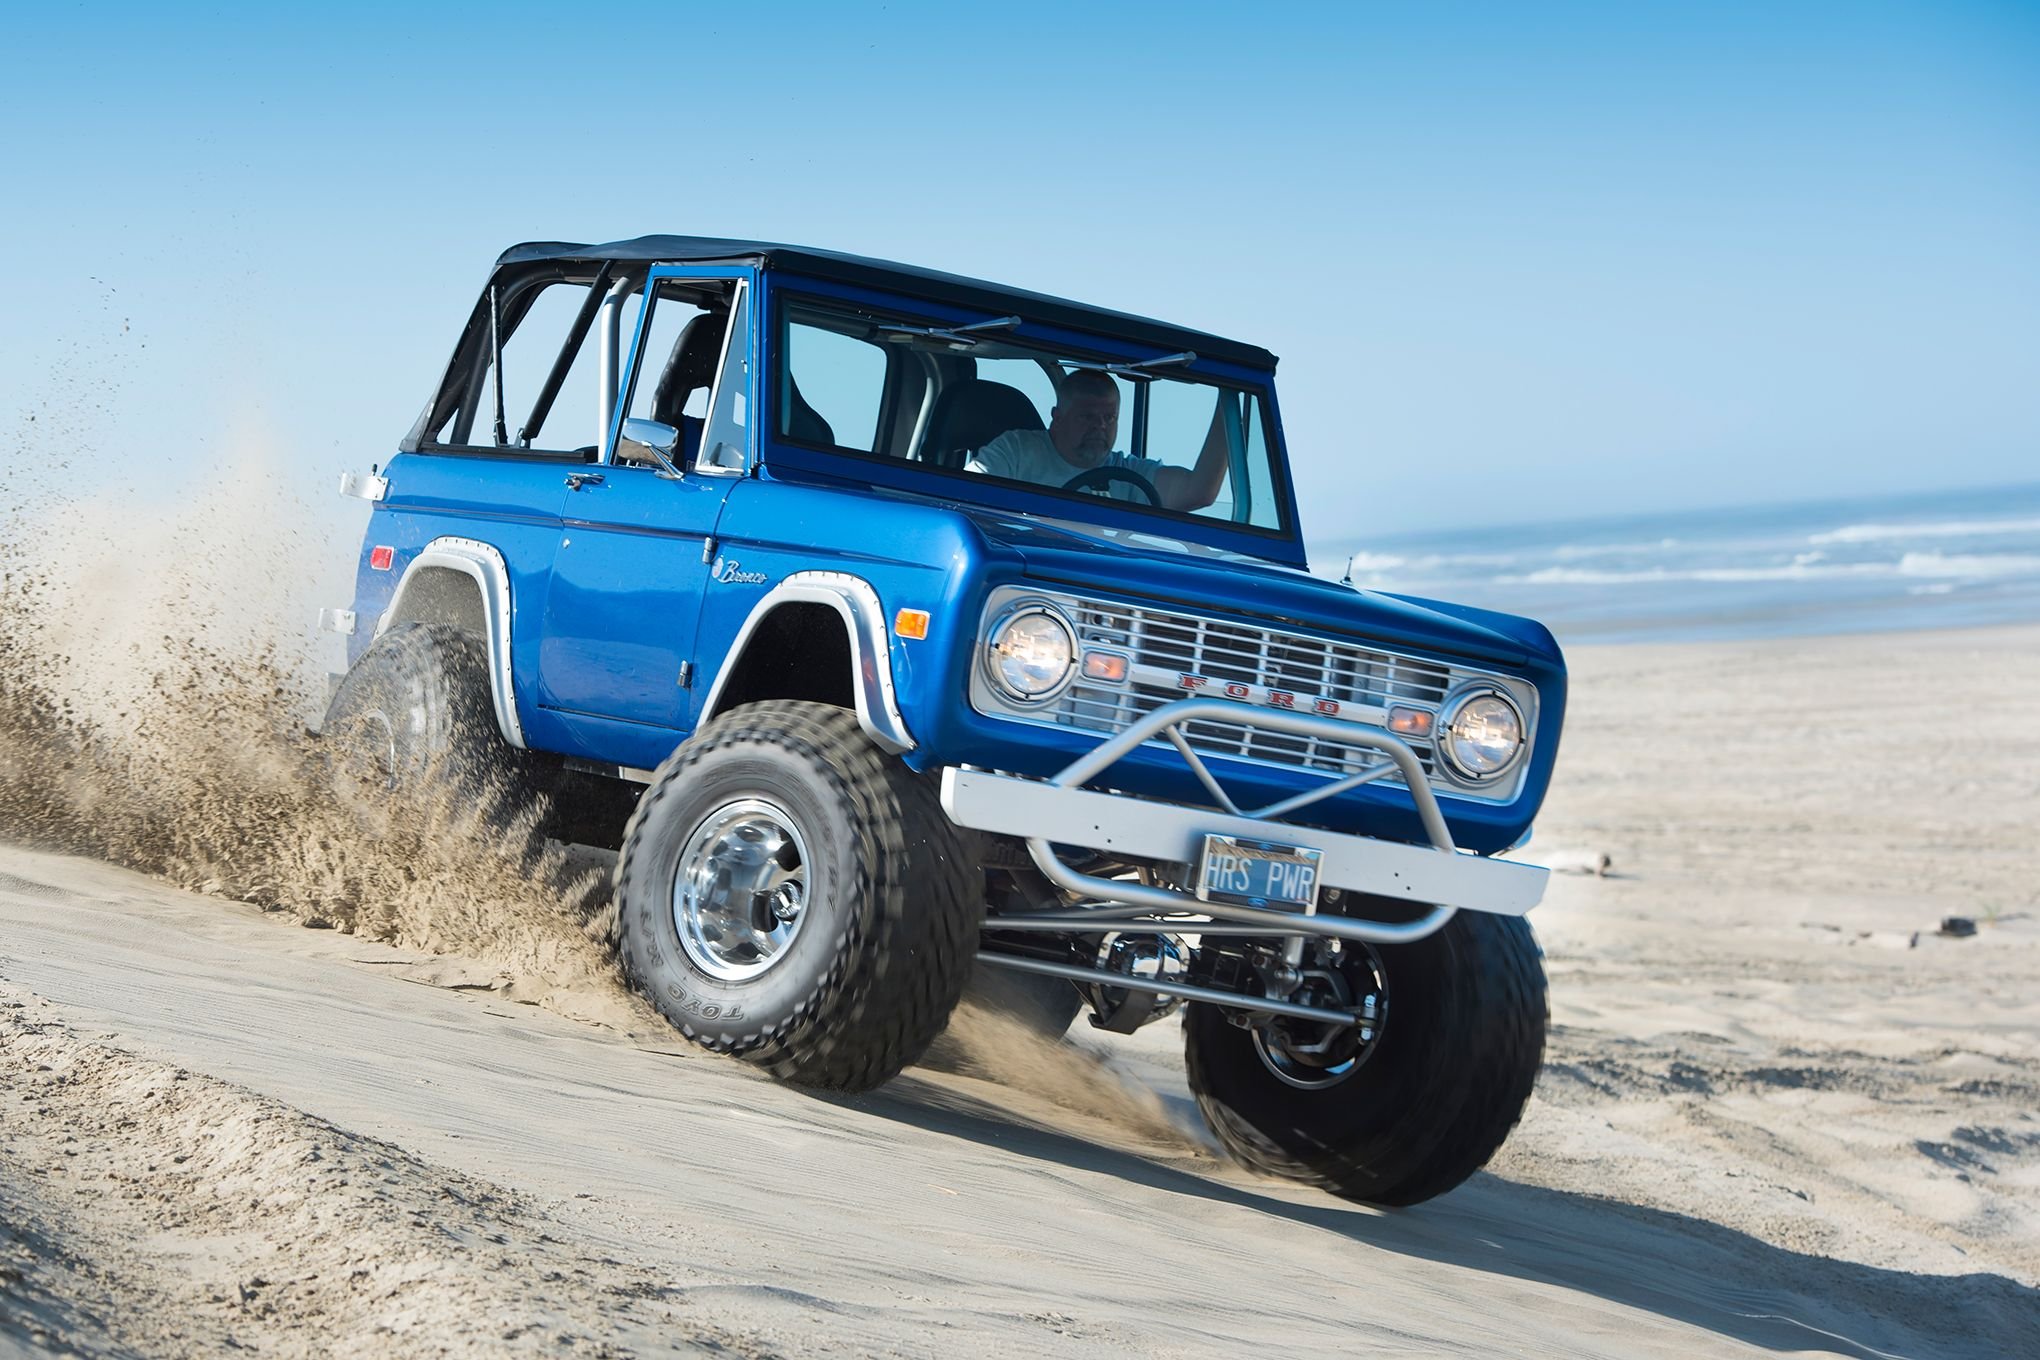 1966 16 Ford Bronco Offroad 4x4 Custom Truck Suv Wallpapers Hd